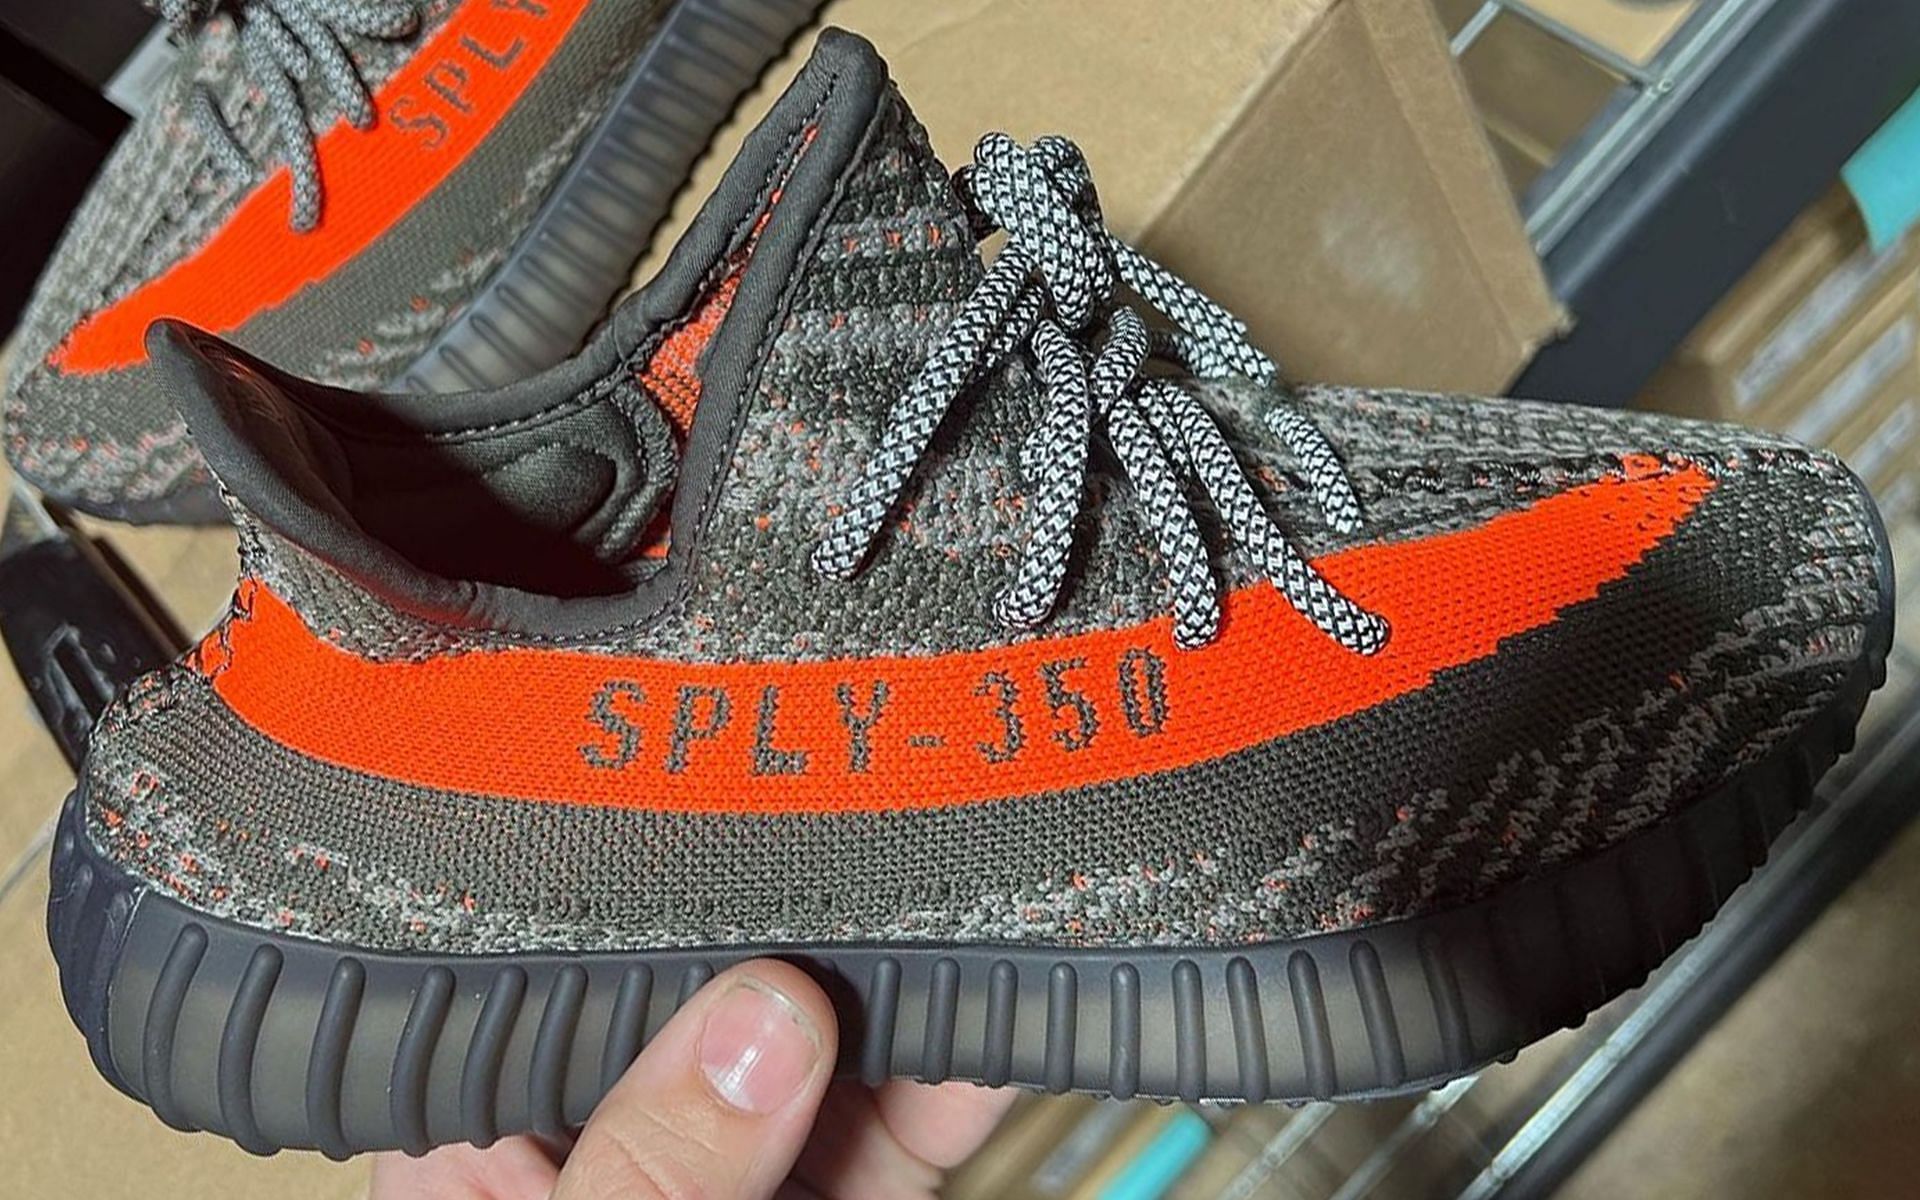 Where to buy Adidas Yeezy BOOST 350 V2 Dark Beluga shoes ? Release date, price more explored